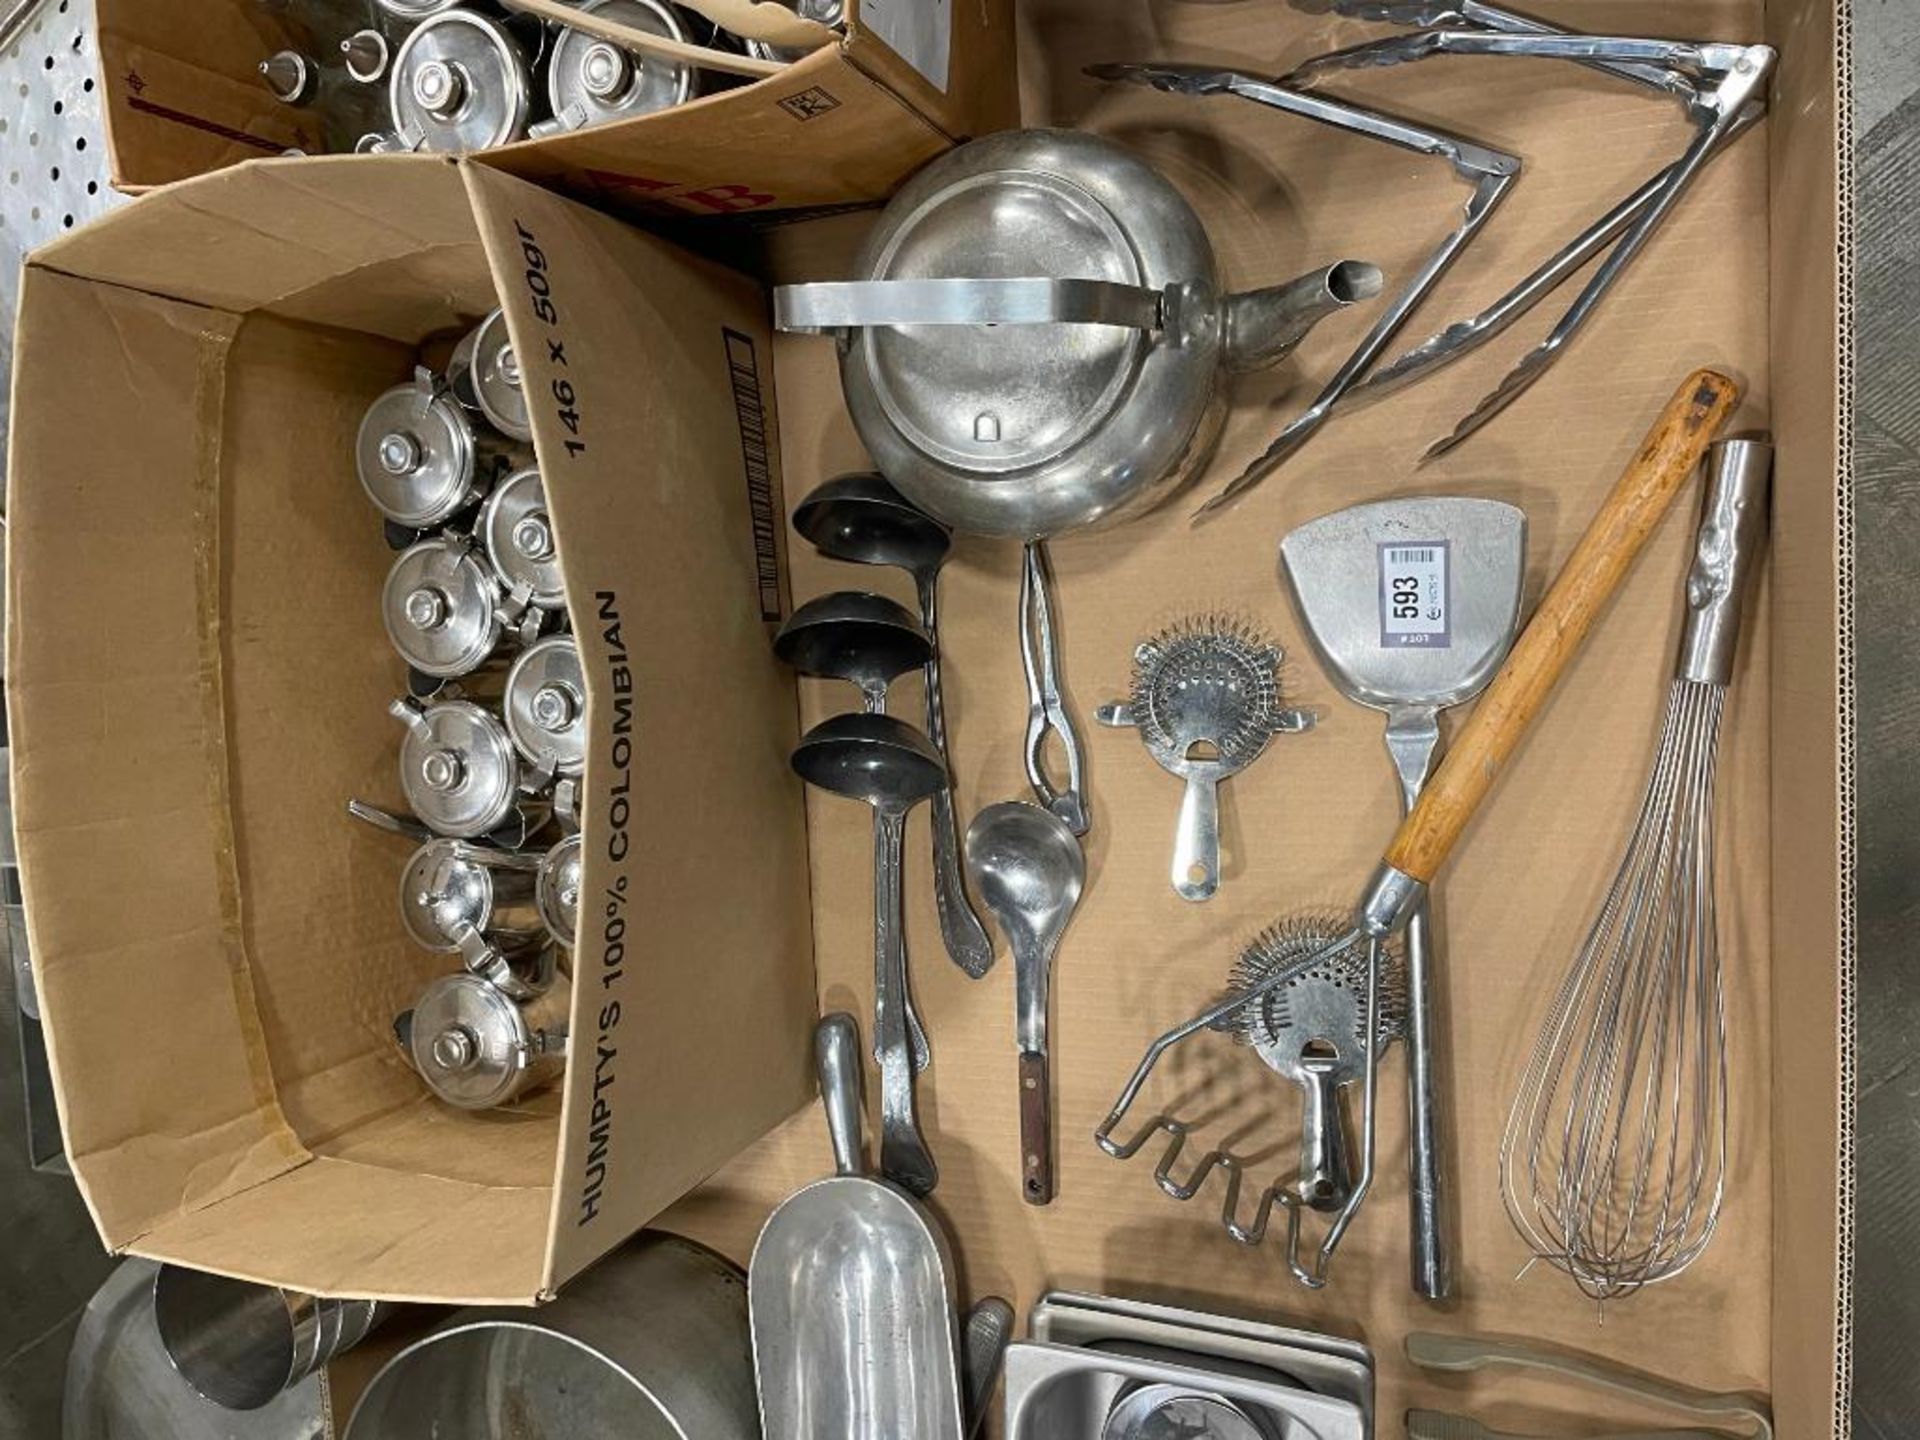 LOT OF ASSORTED KITCHEN ITEMS INCLUDING: INSERTS, TONGS, SCOOPS, TEAPOTS - Image 4 of 13